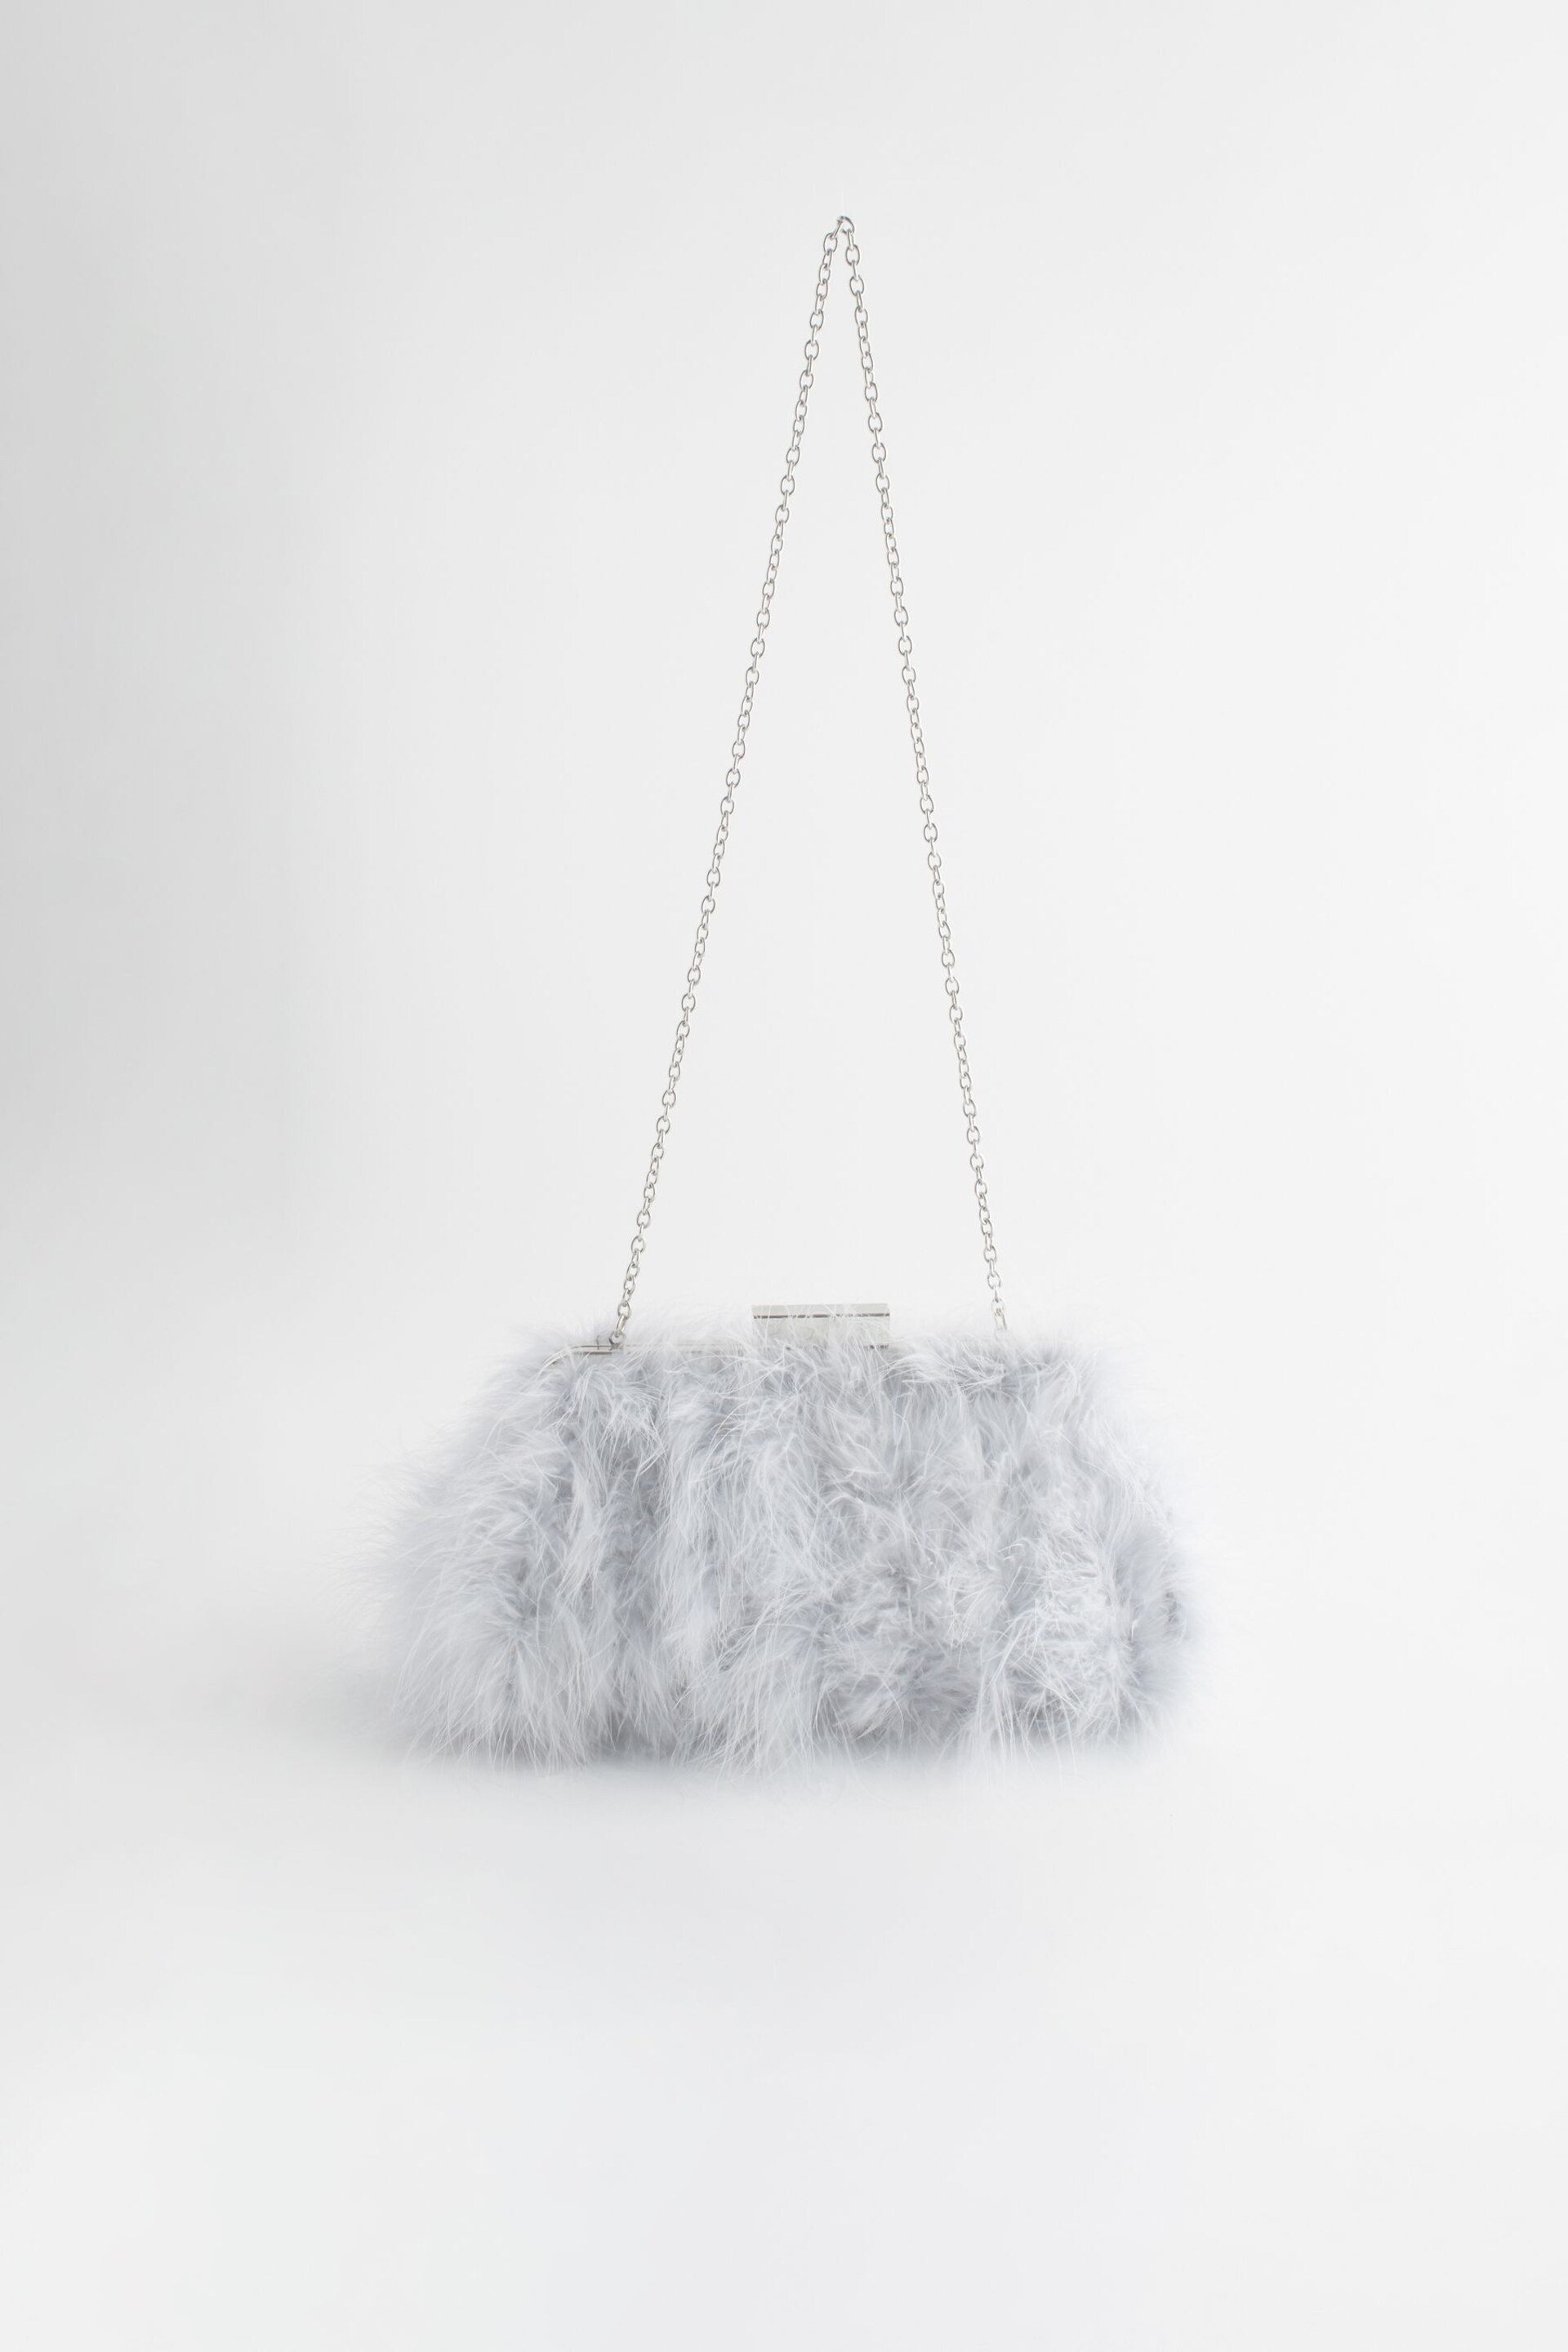 Grey Feather Clutch Bag - Image 6 of 9